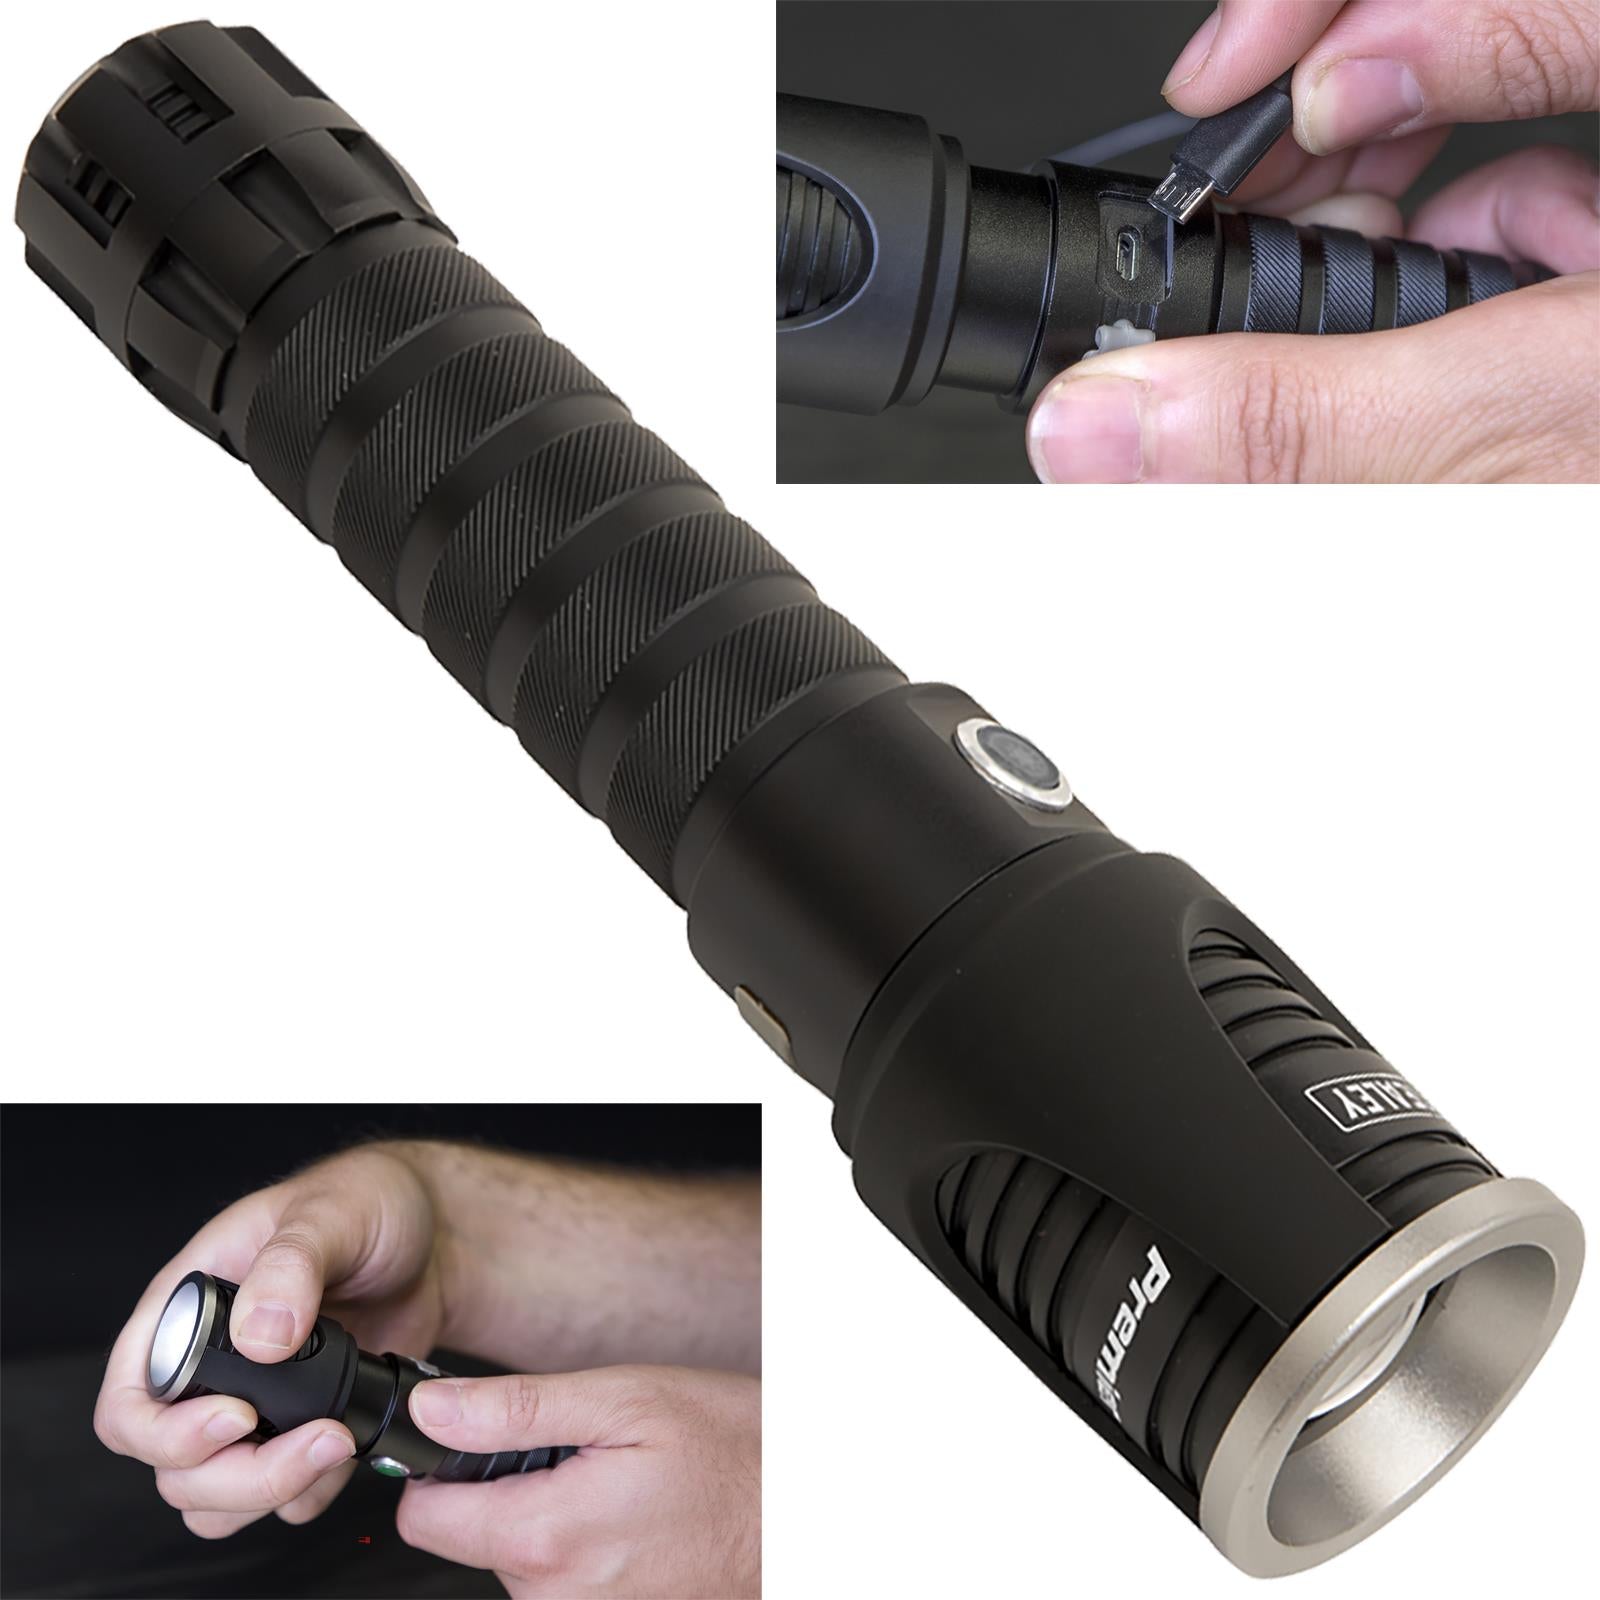 Sealey Aluminium Torch 10W CREE XM-L LED Adjustable Focus Rechargeable 1000 Lumens